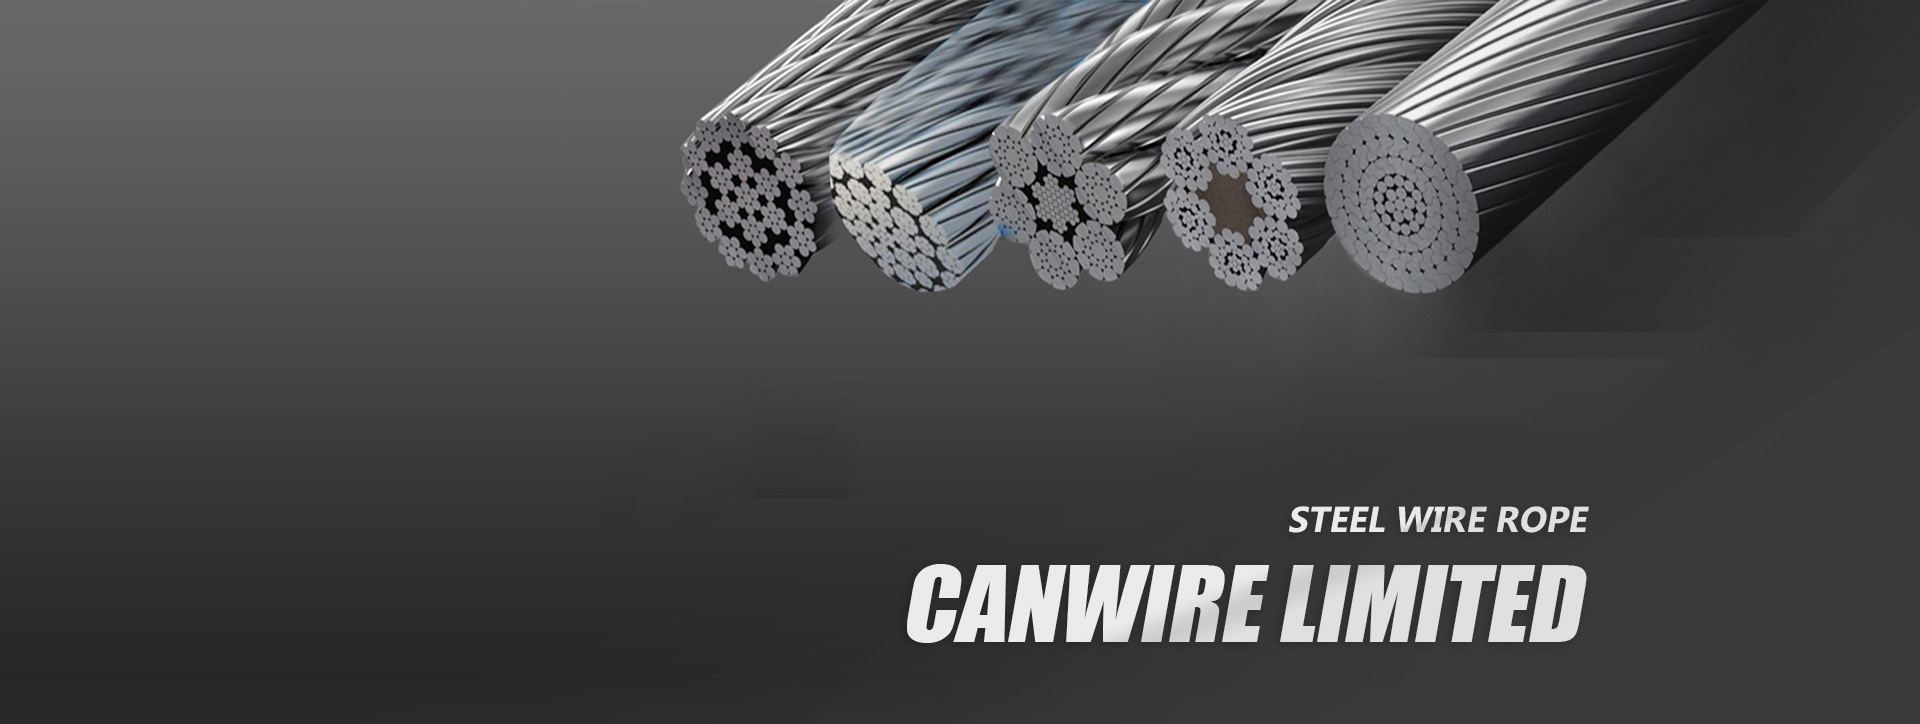 CANWIRE LIMITED